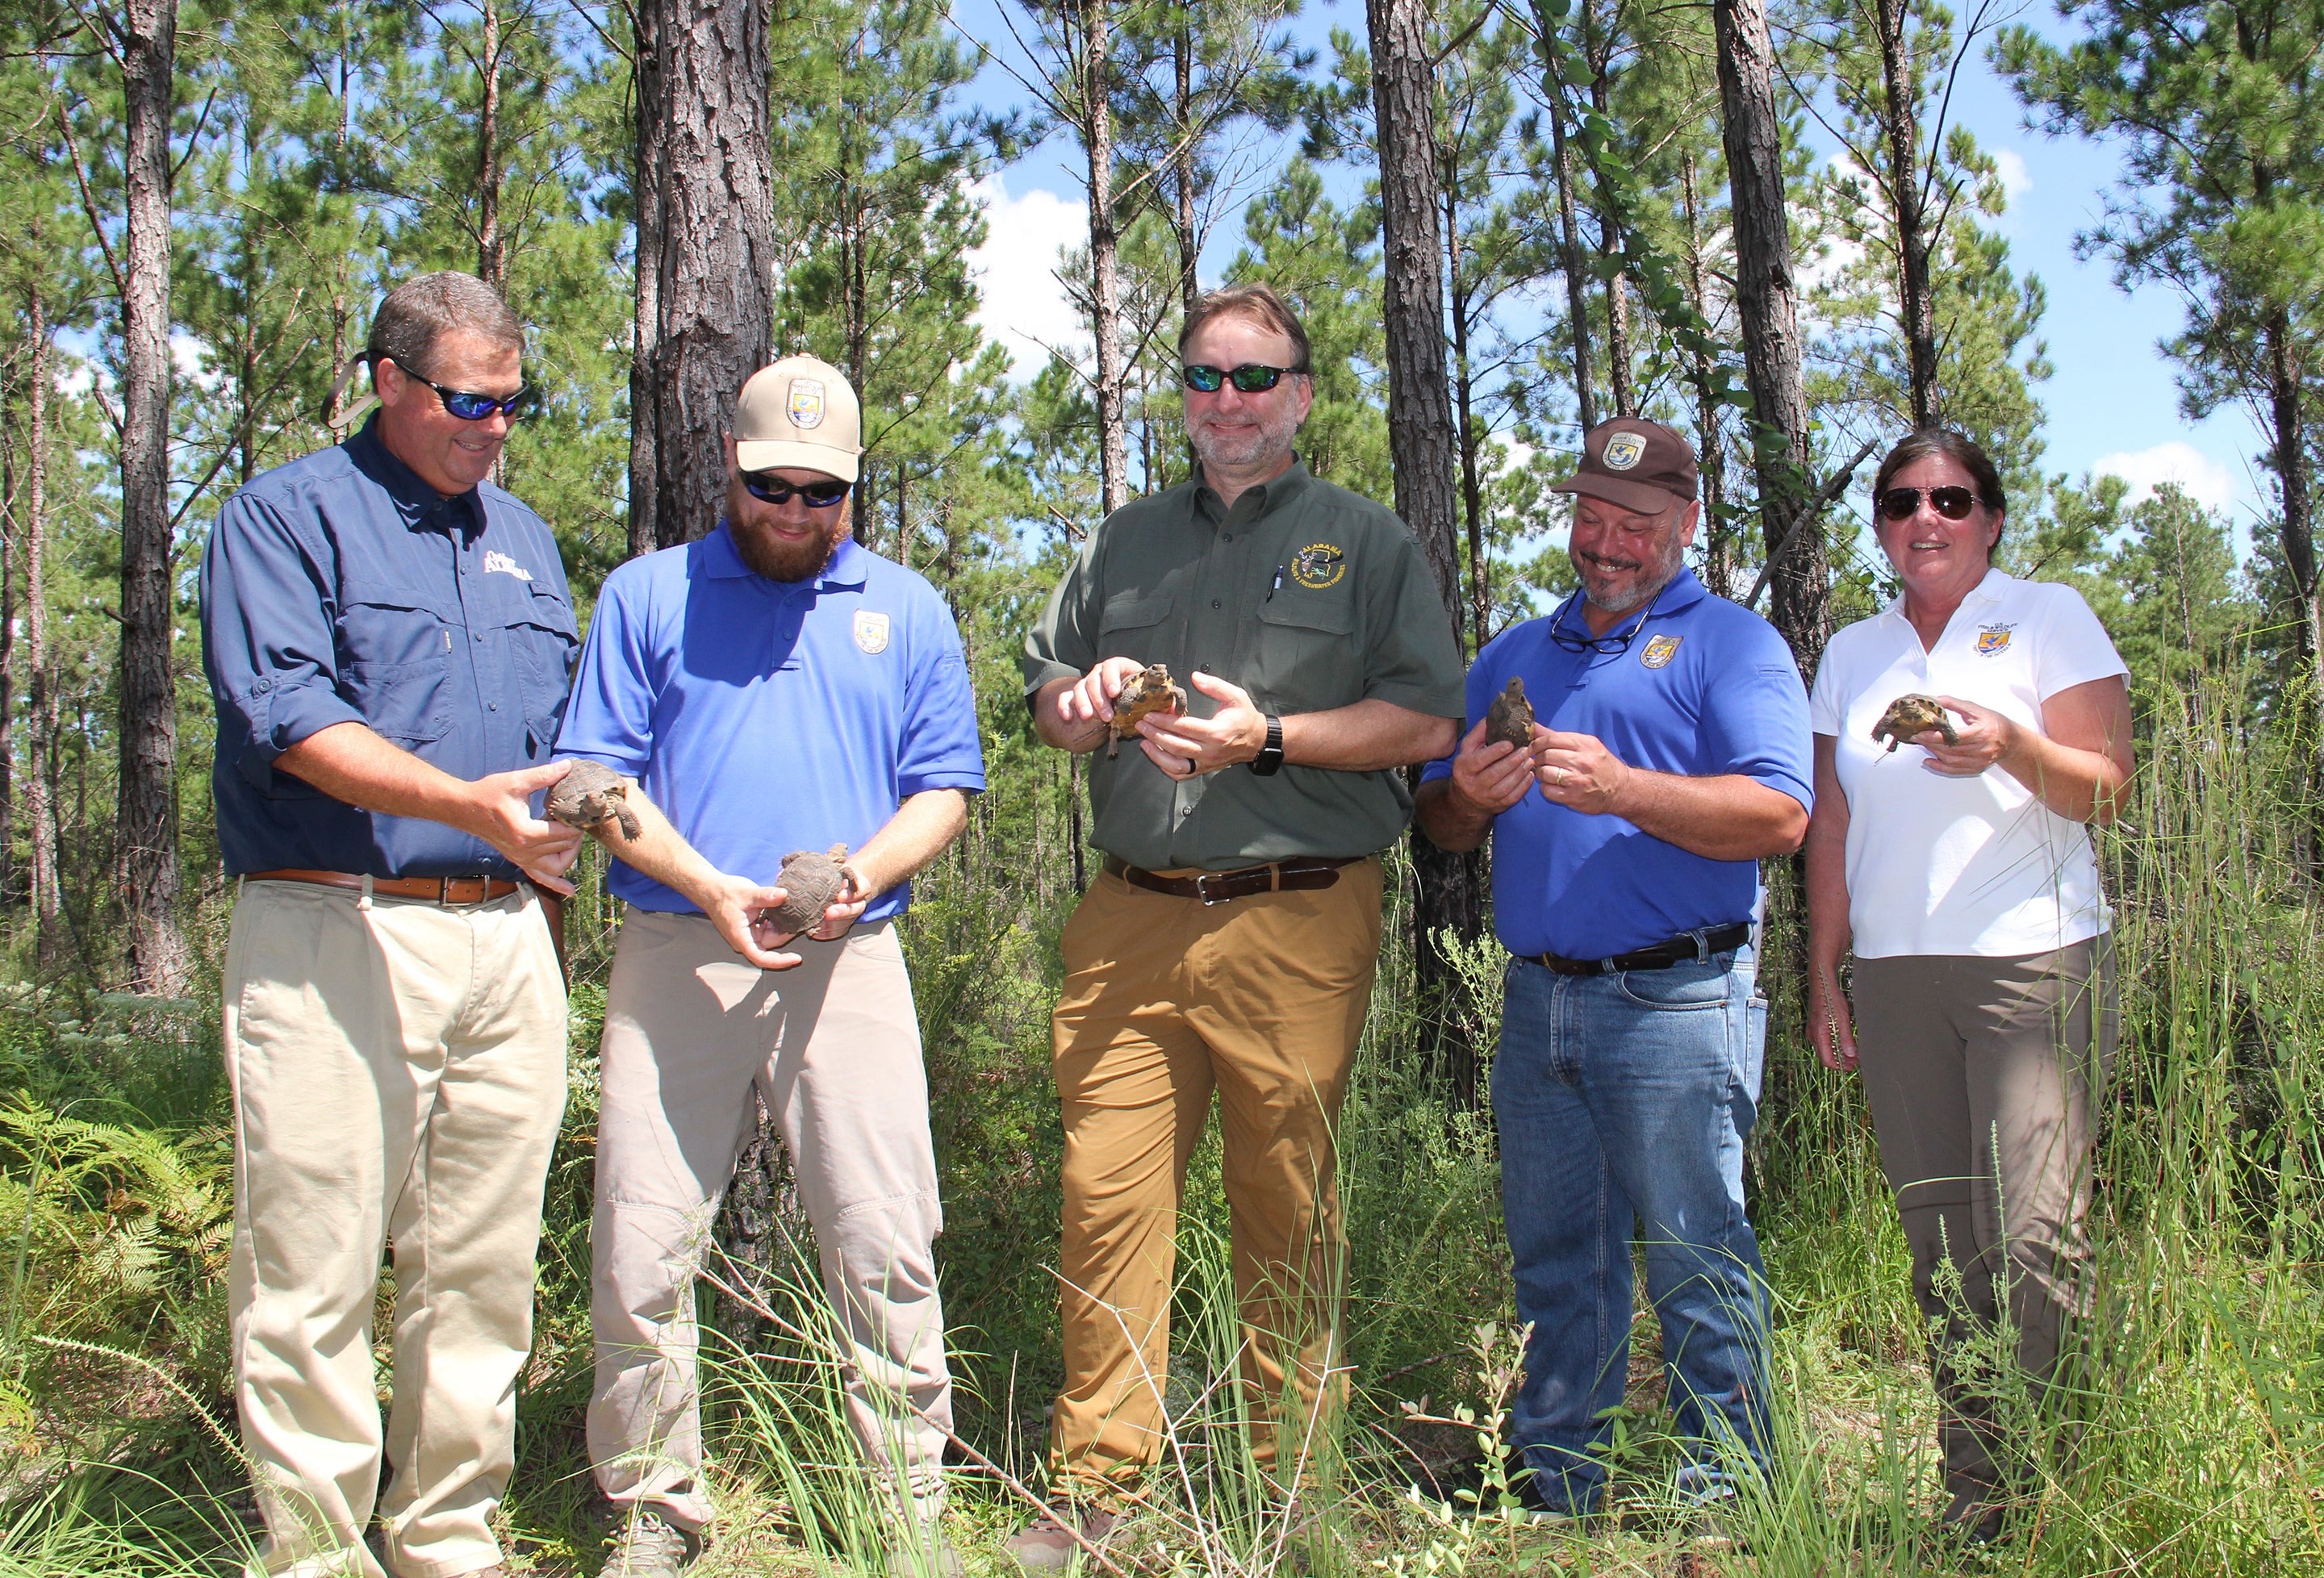 ADCNR Commissioner Chris Blankenship, USFWS Gopher Tortoise Lead John Tupy, WFF Director Chuck Sykes, USFWS Southeast Region Director Leopoldo Miranda-Castro, and USFWS Alabama Section 6 Coordinator Shannon Holbrook participated in the tortoise release.